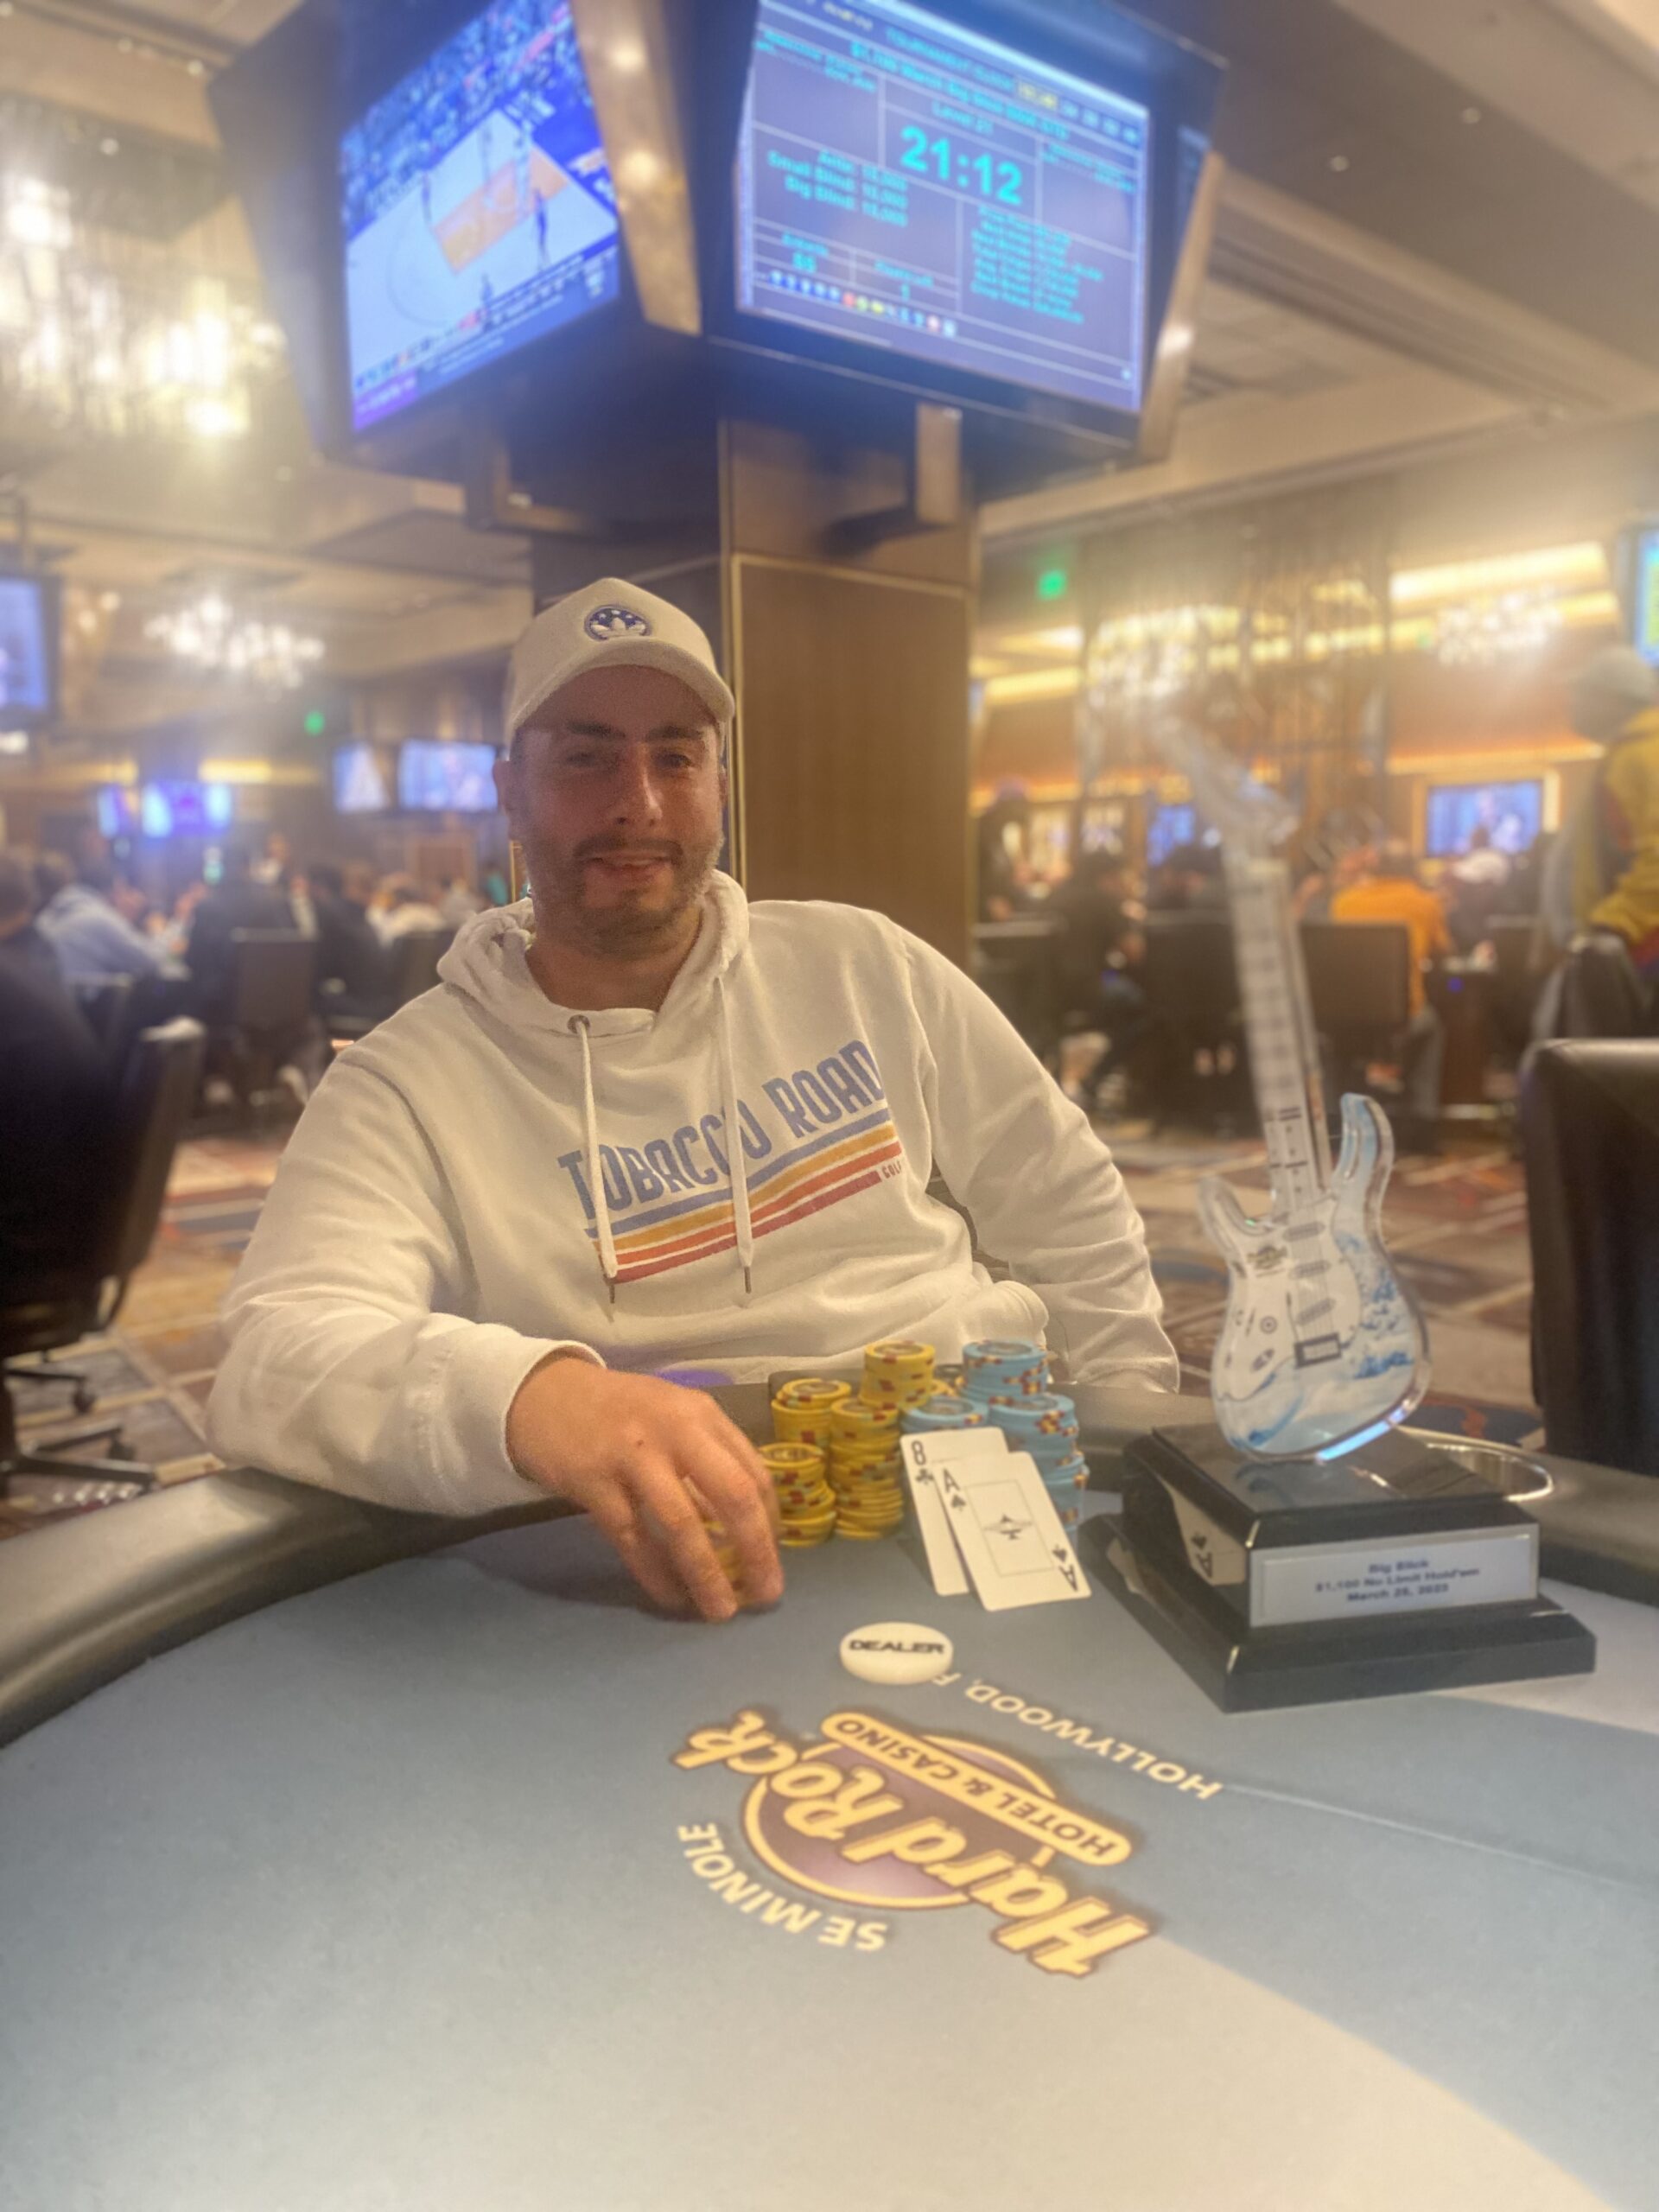 March Big Slick: James Anderson Scores the W and $26K